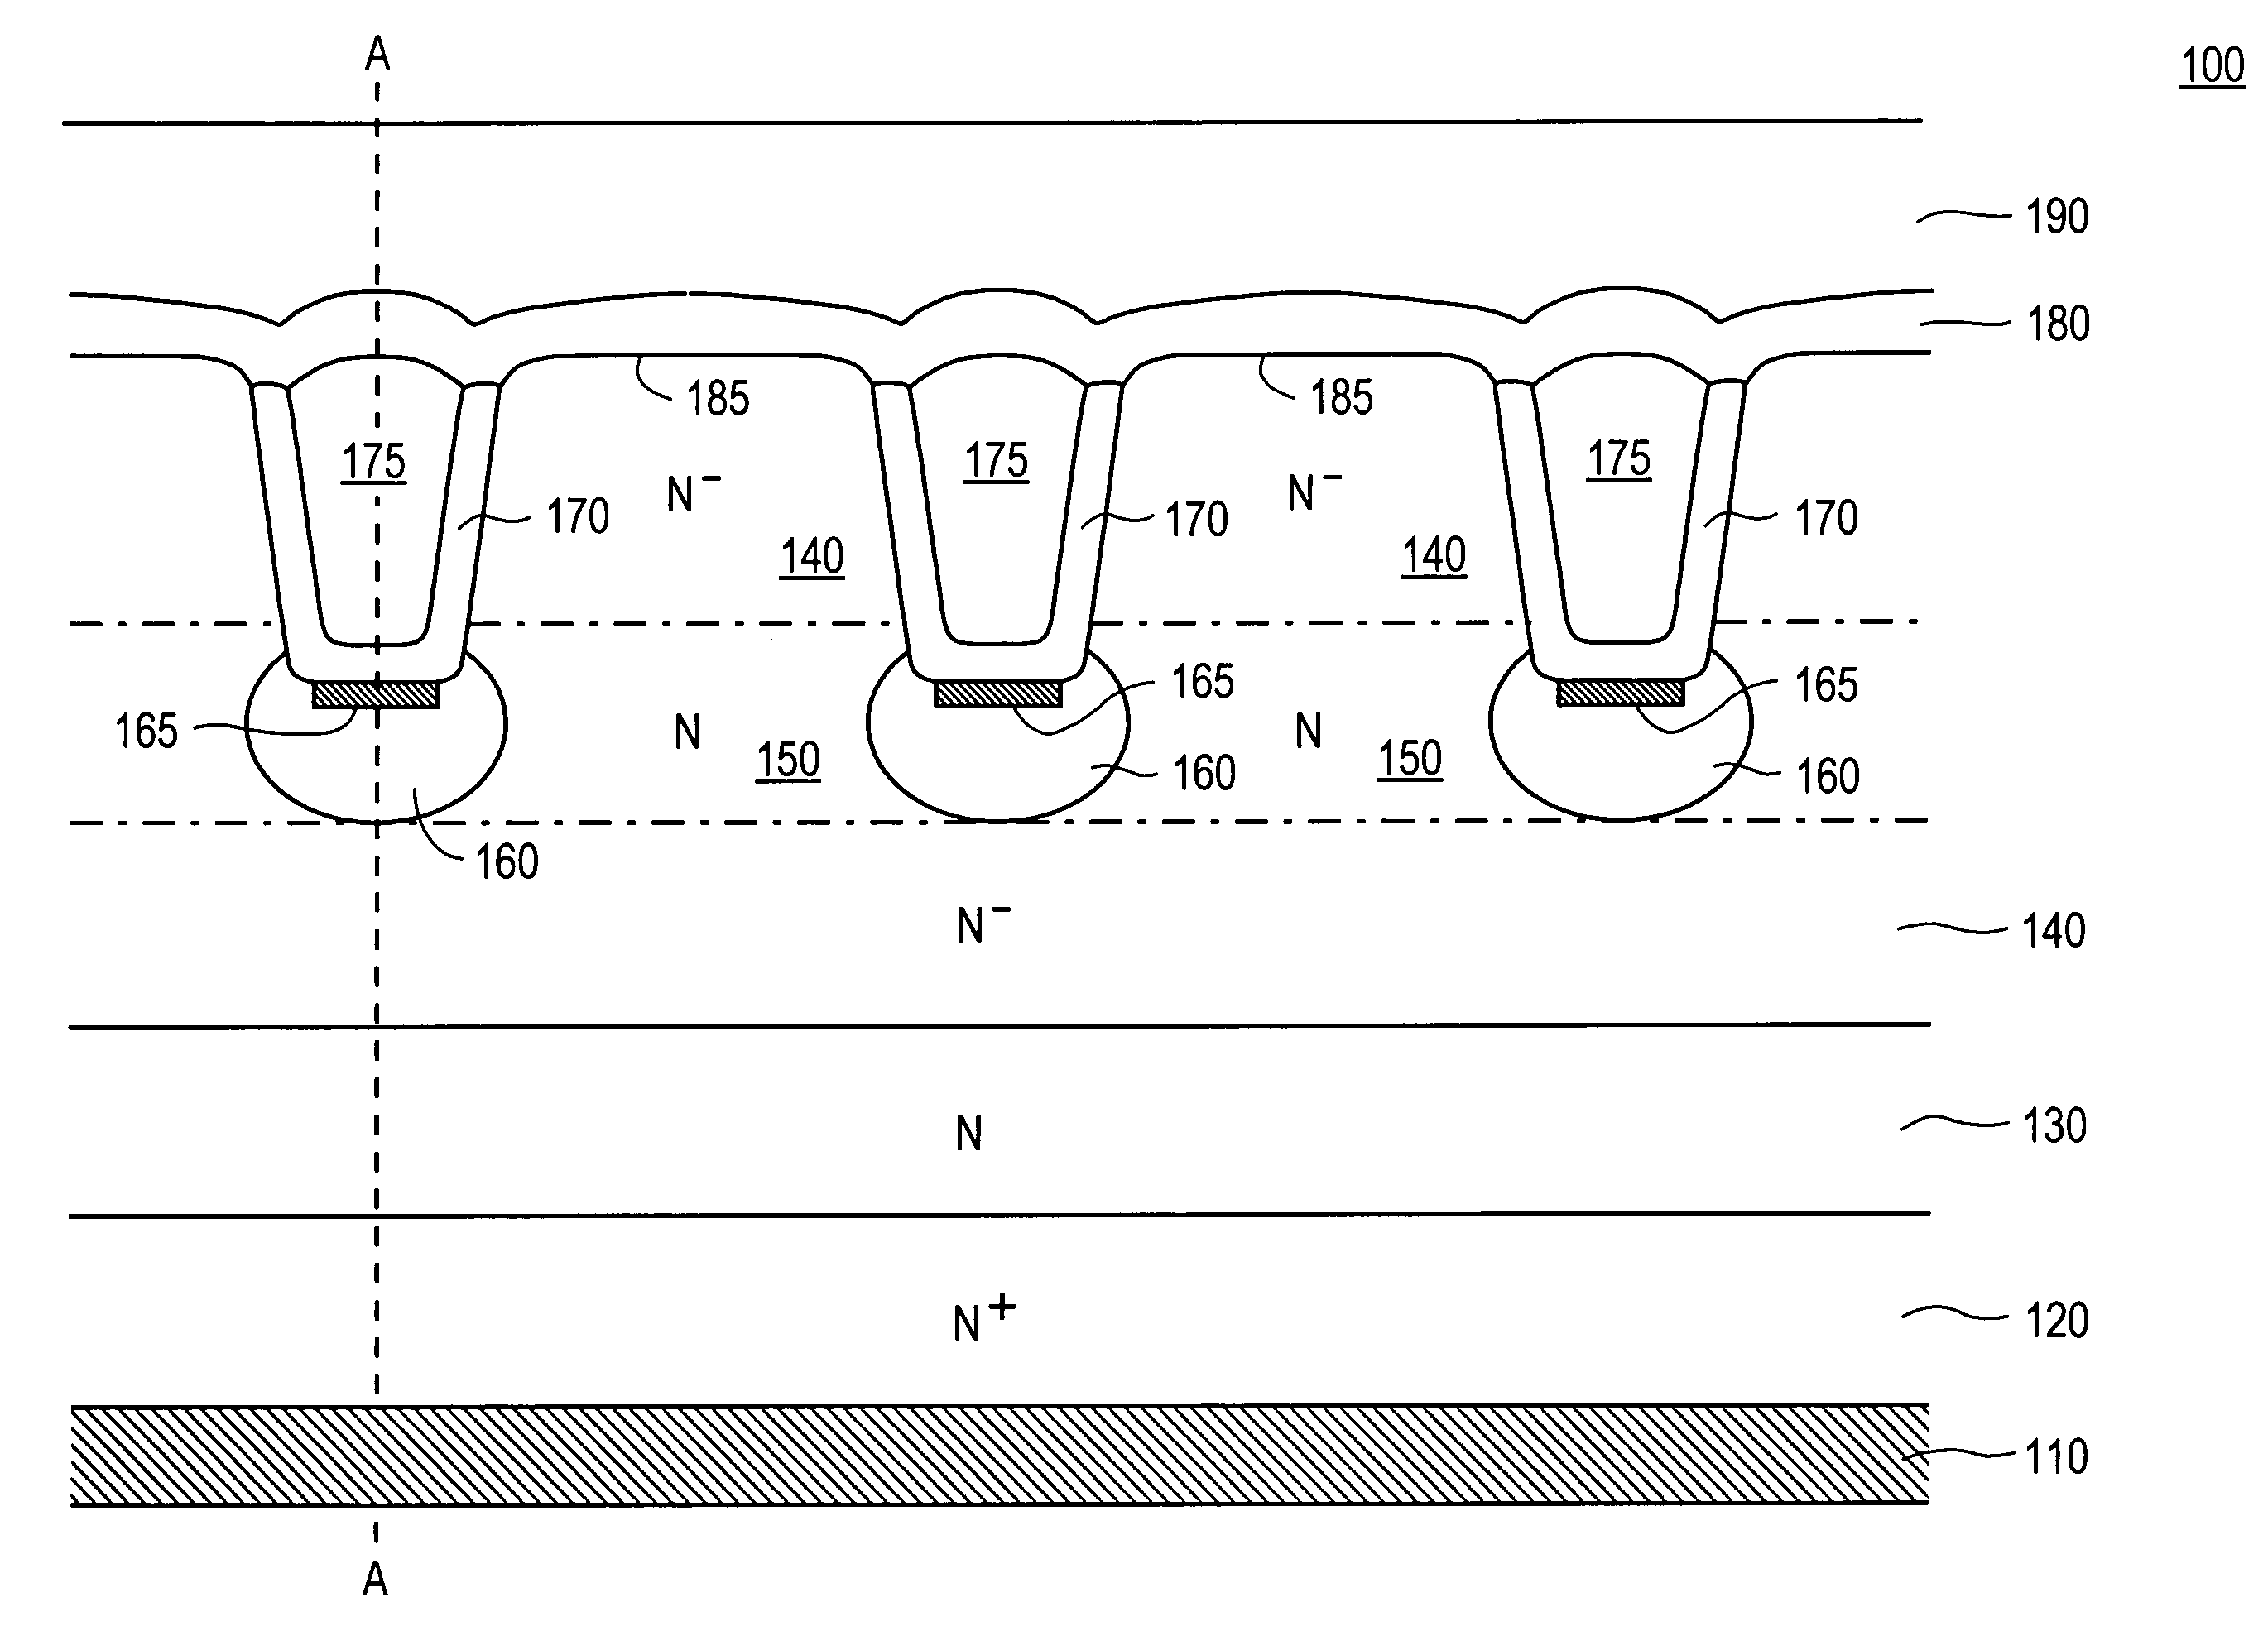 Structure and method for a fast recovery rectifier structure